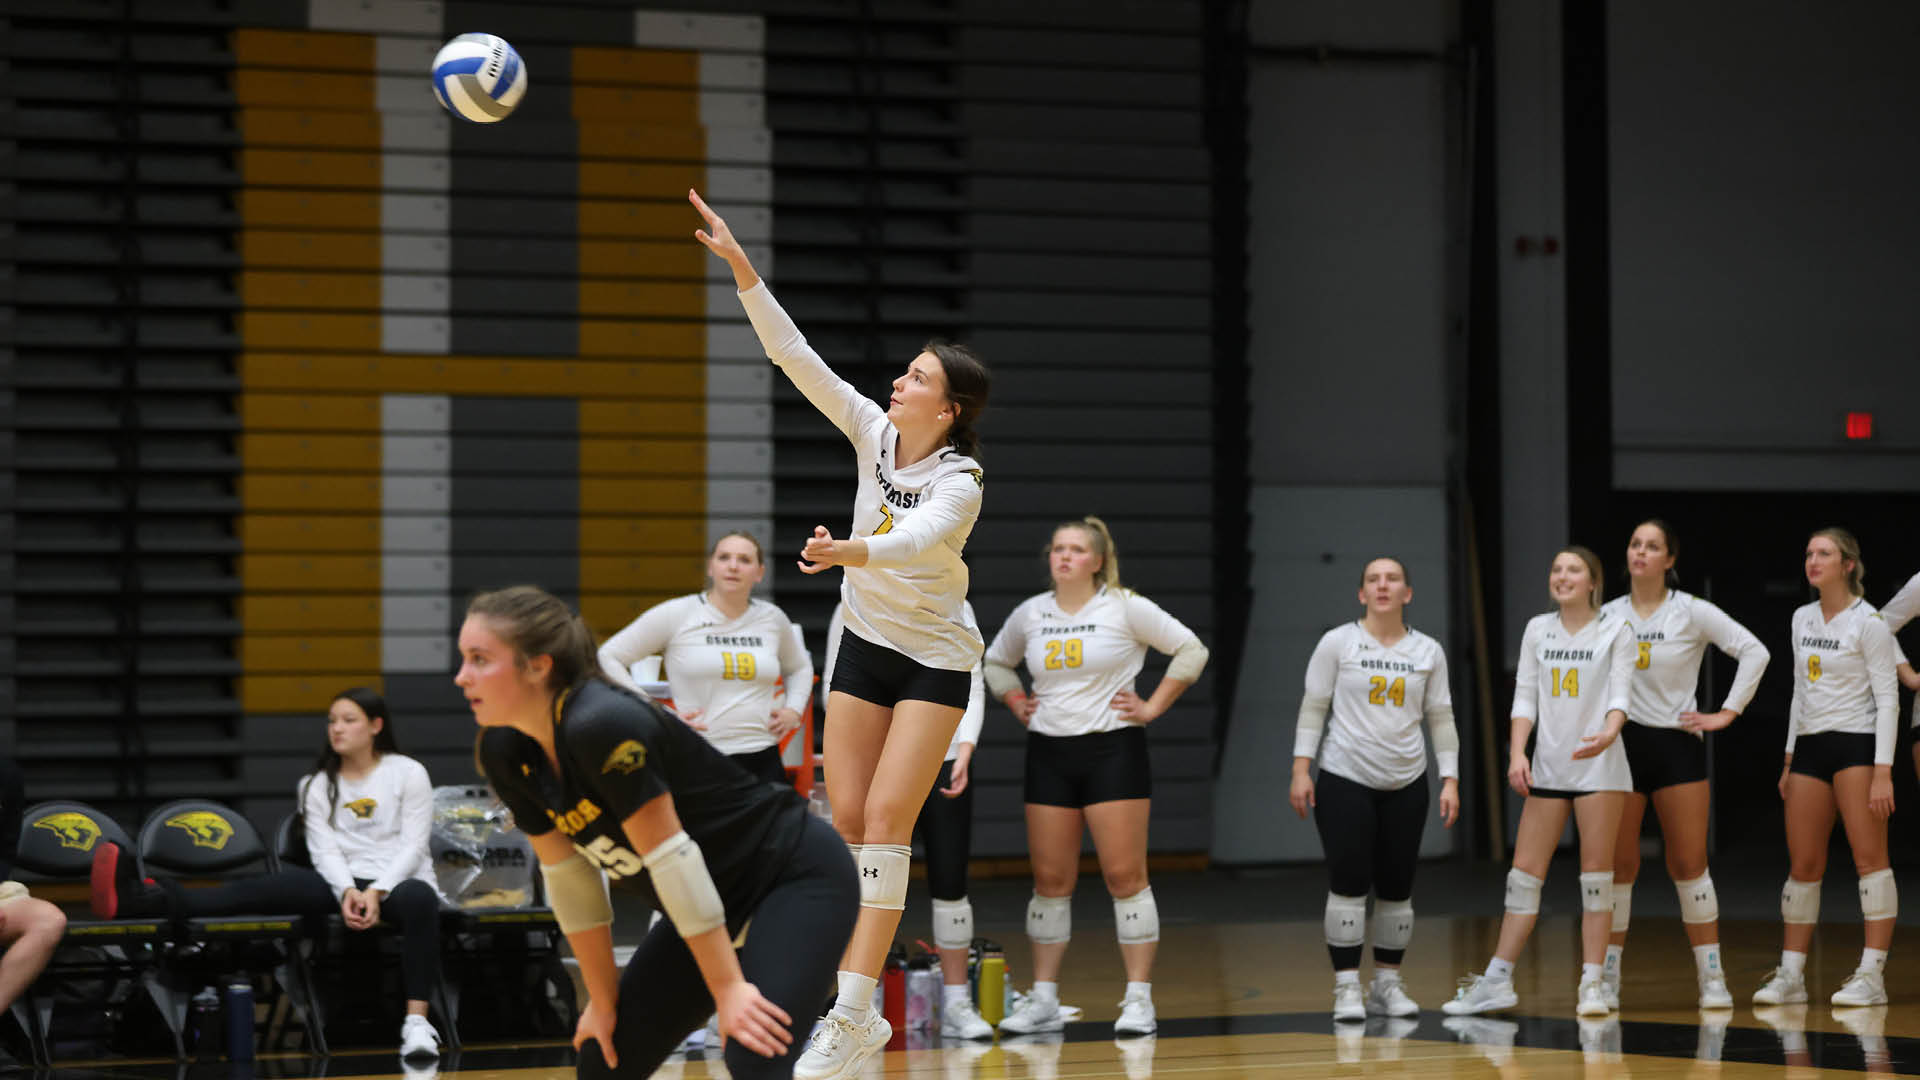 Kalli Mau had 56 total assists to help the Titans to two victories Tuesday in Illinois.